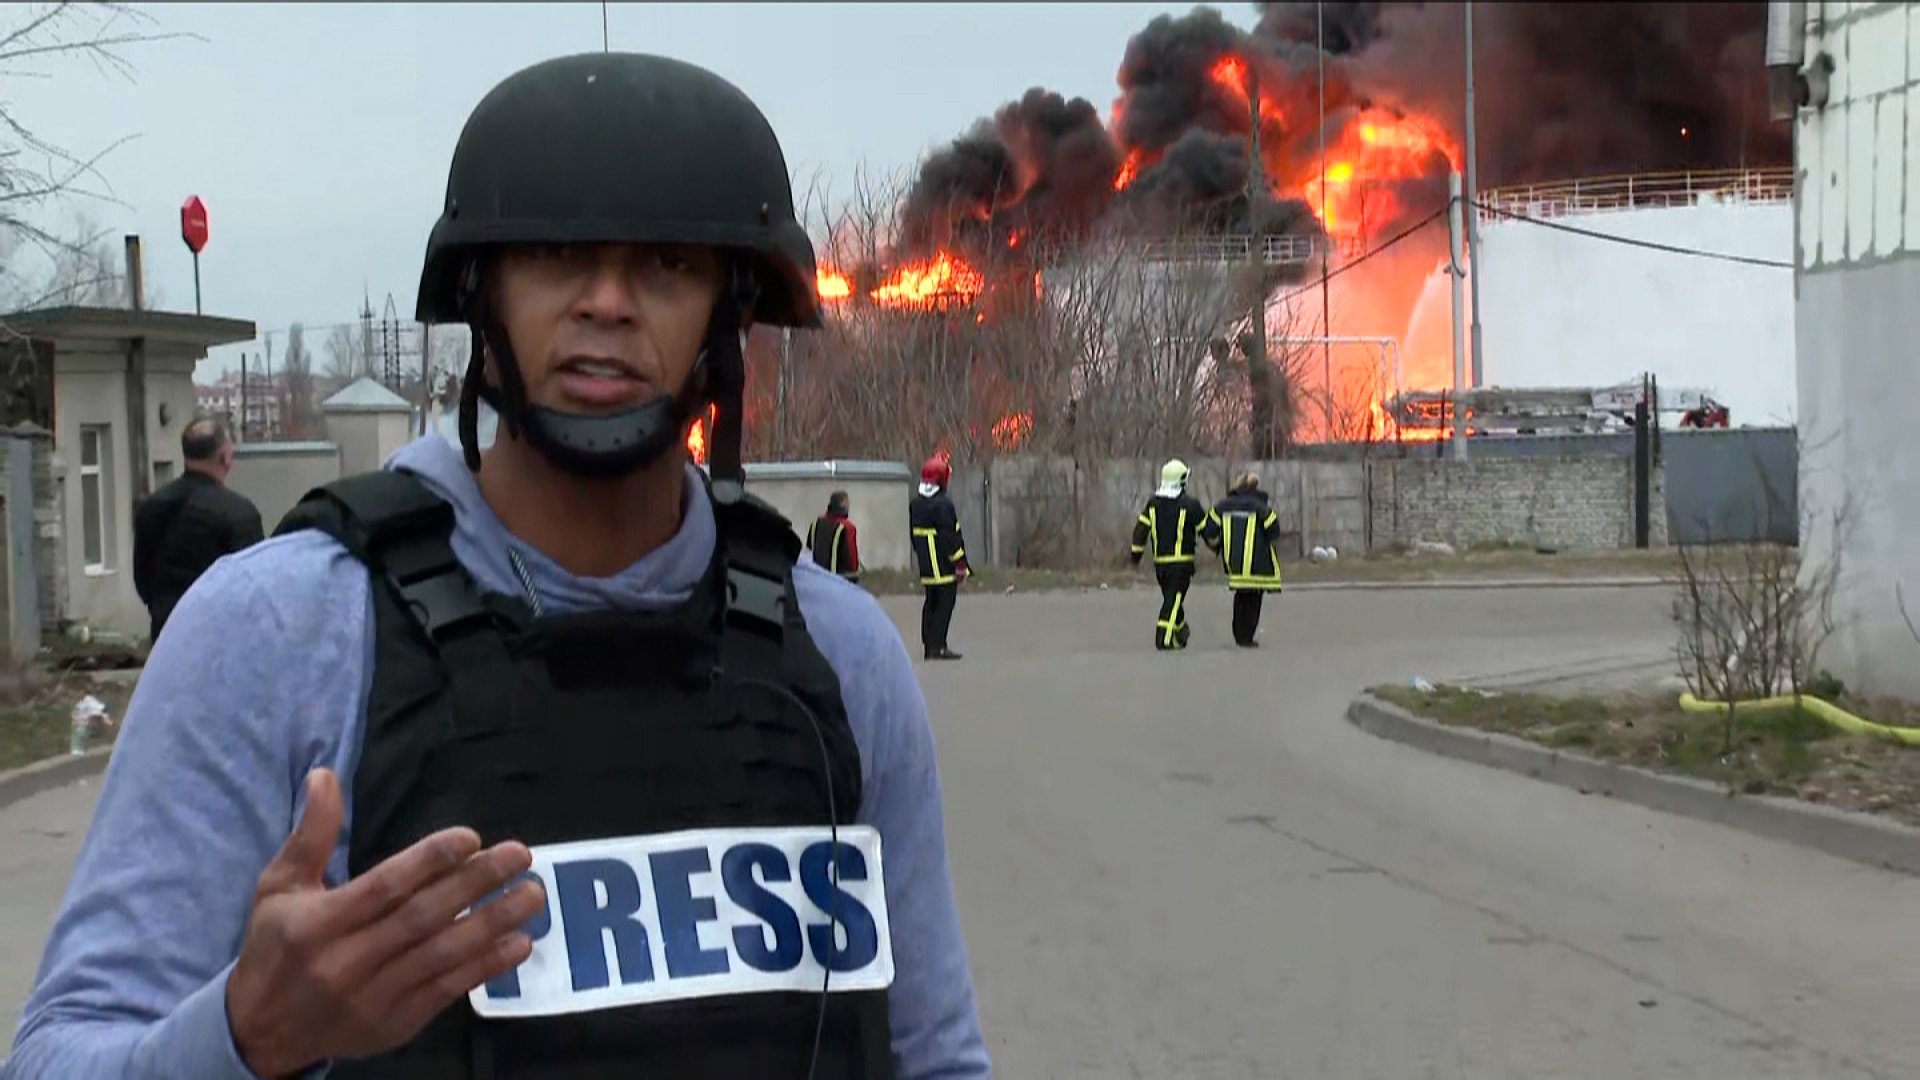 CNN’s Don Lemon reports from the scene of a fire in Lviv, Ukraine on Saturday. 